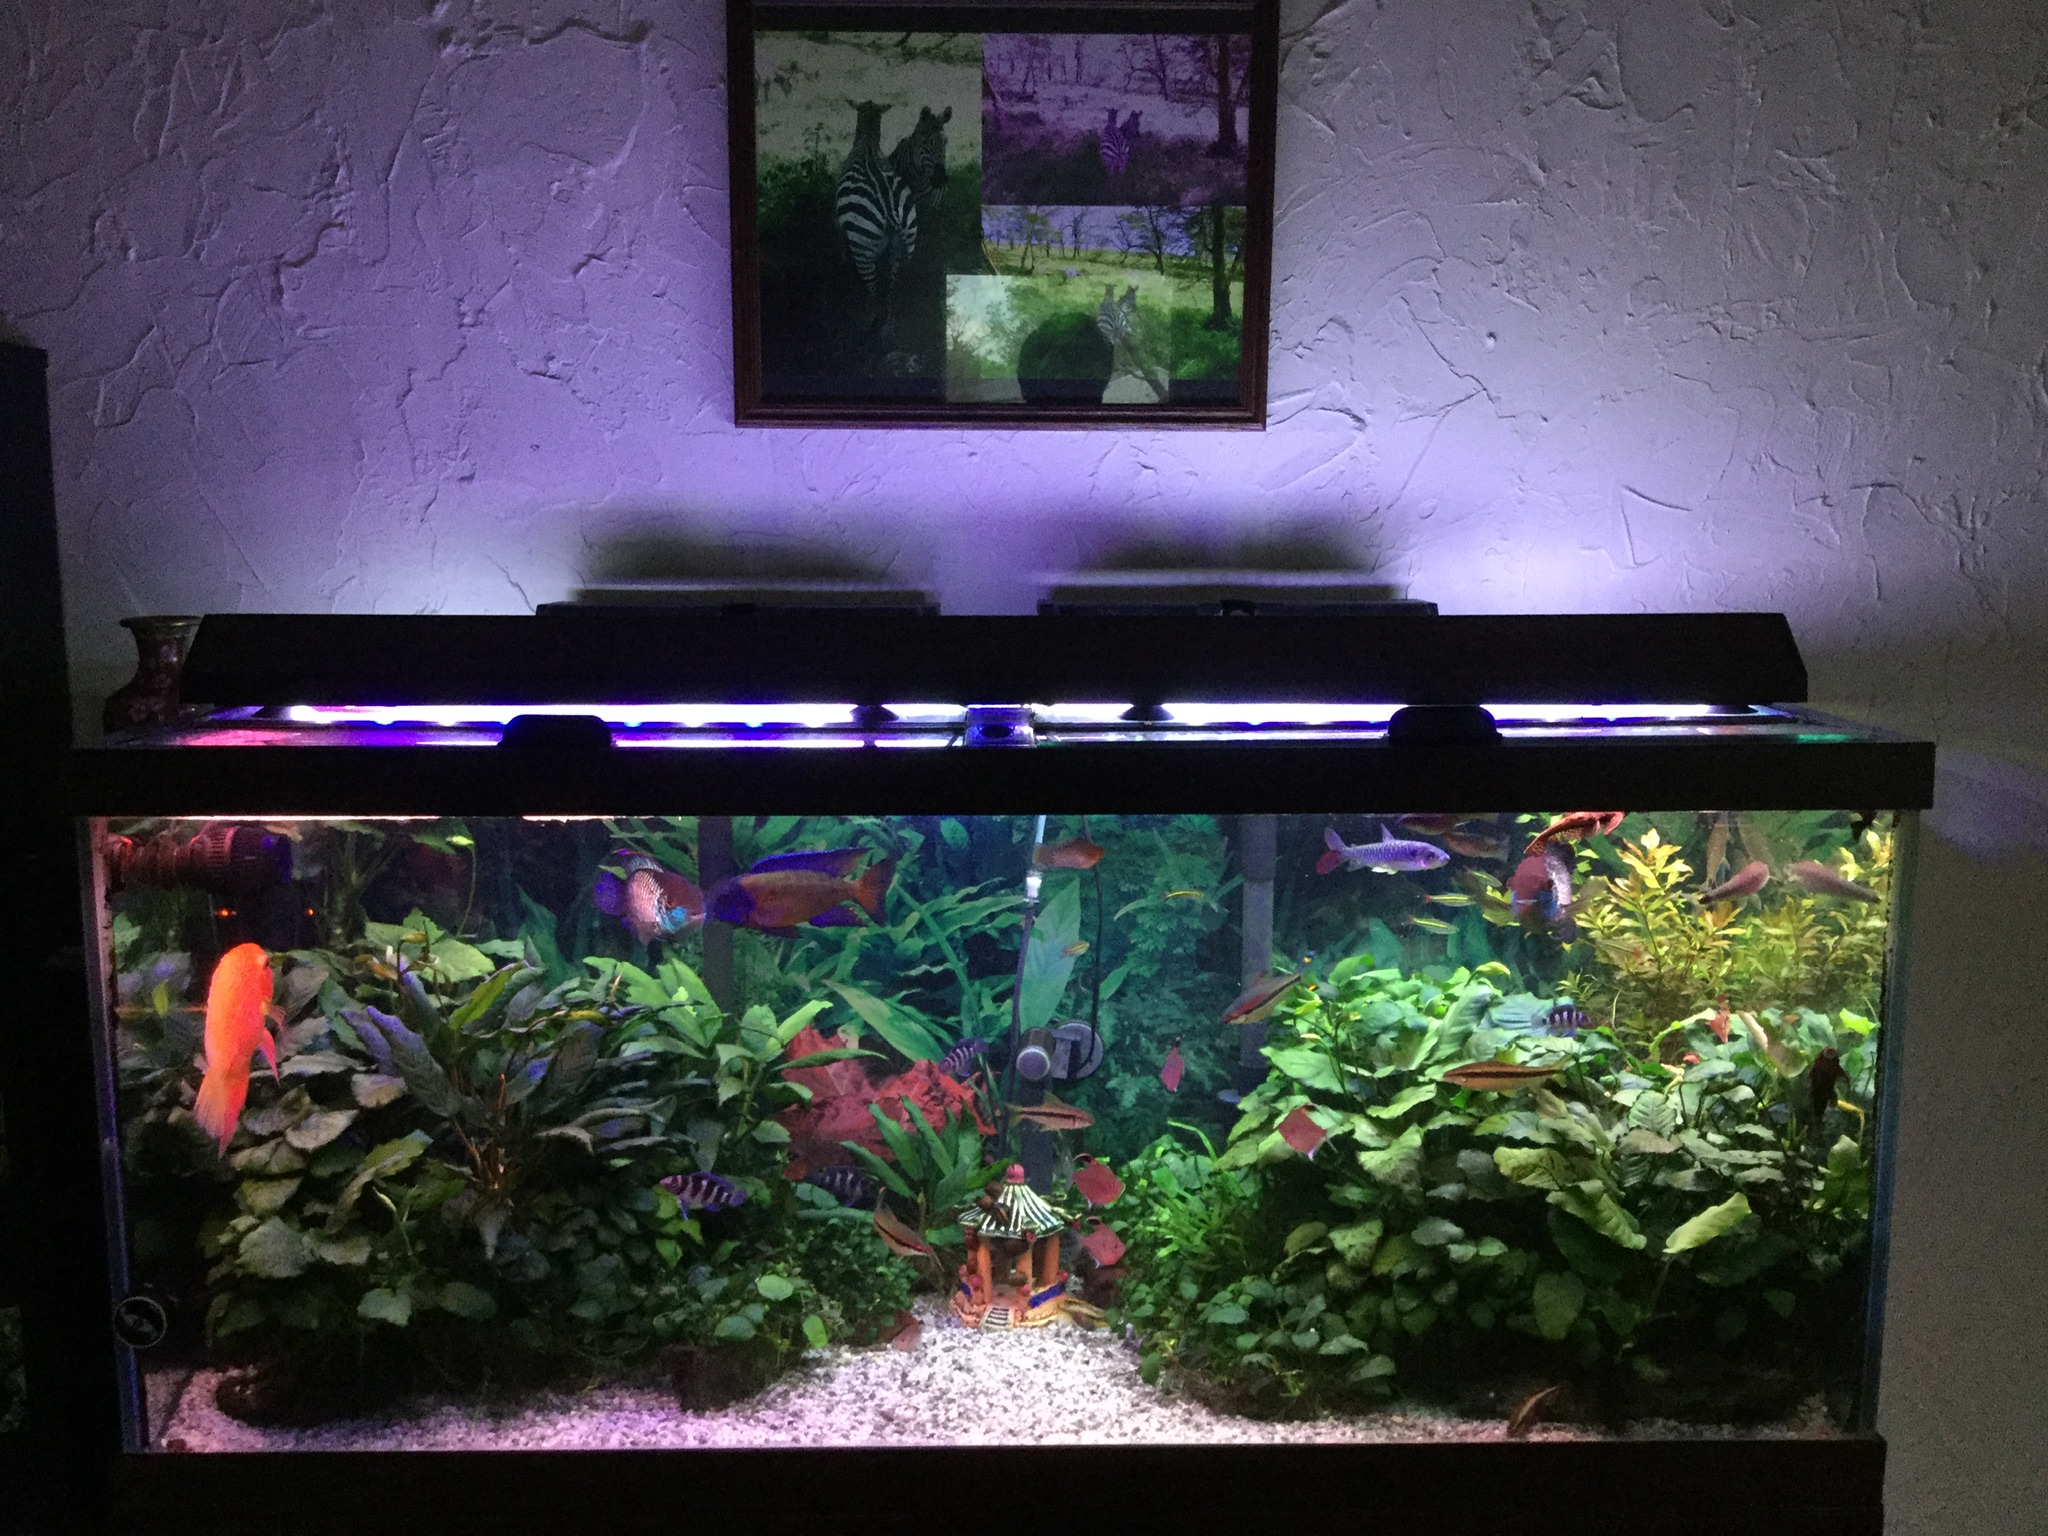 Black background  The Planted Tank Forum